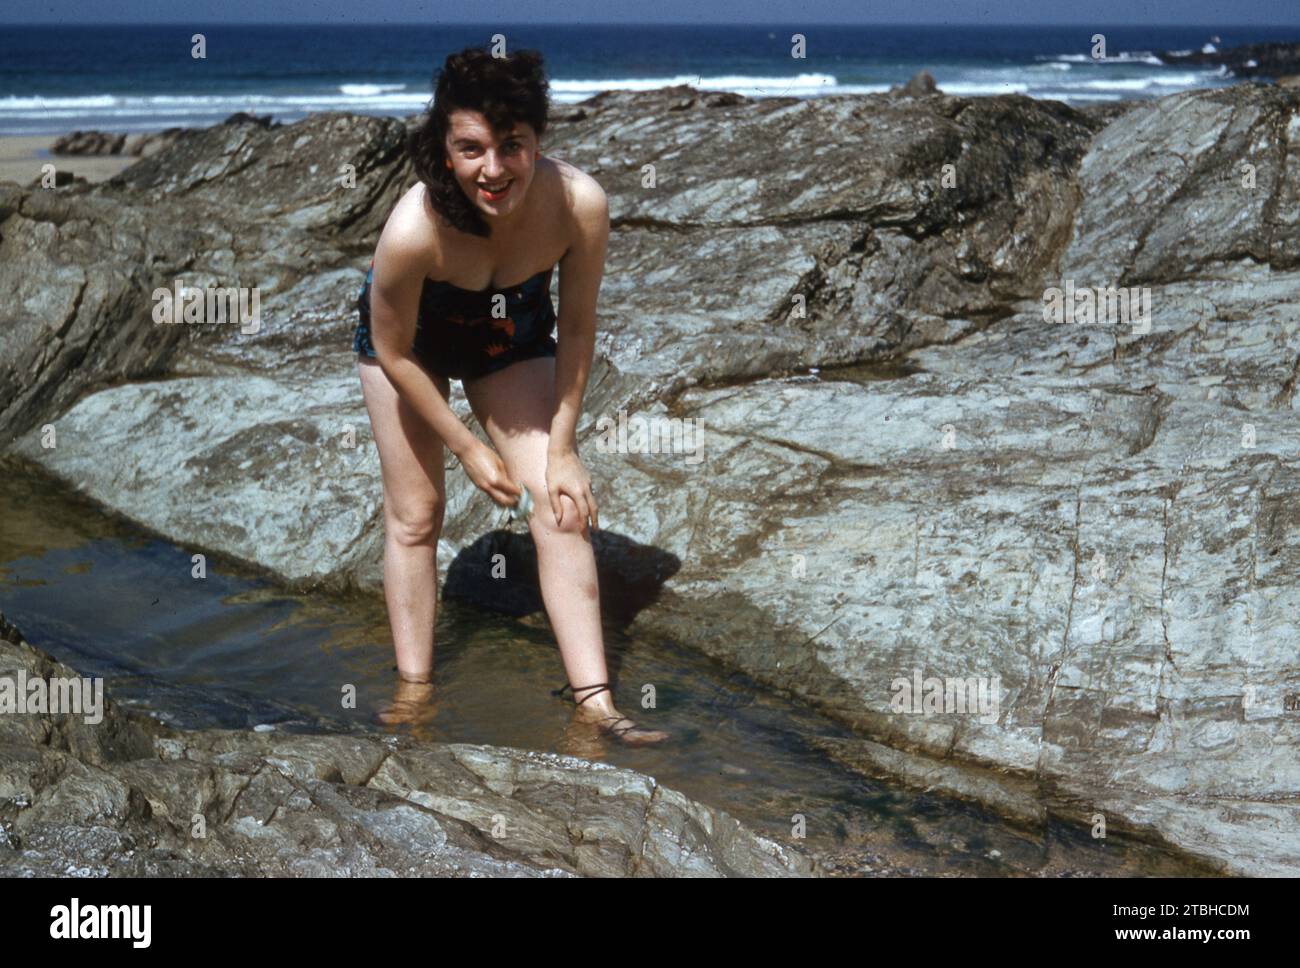 1958 Newquay, a young woman bathing on rocks   Photo by Tony Henshaw Archive Stock Photo